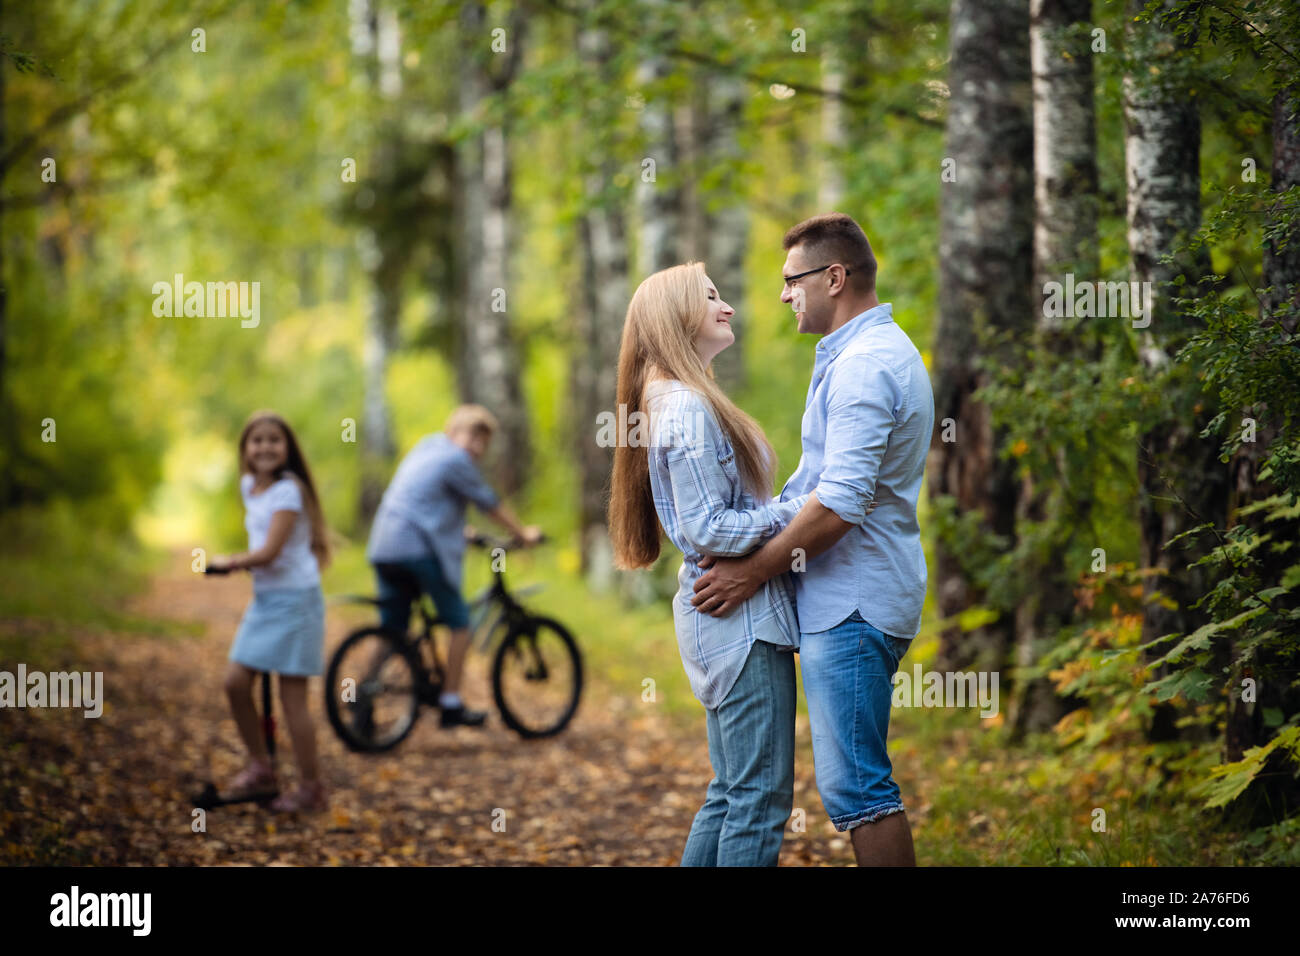 Children having fun while parents kisses. Family on outdoor walk in the park in summer. Stock Photo